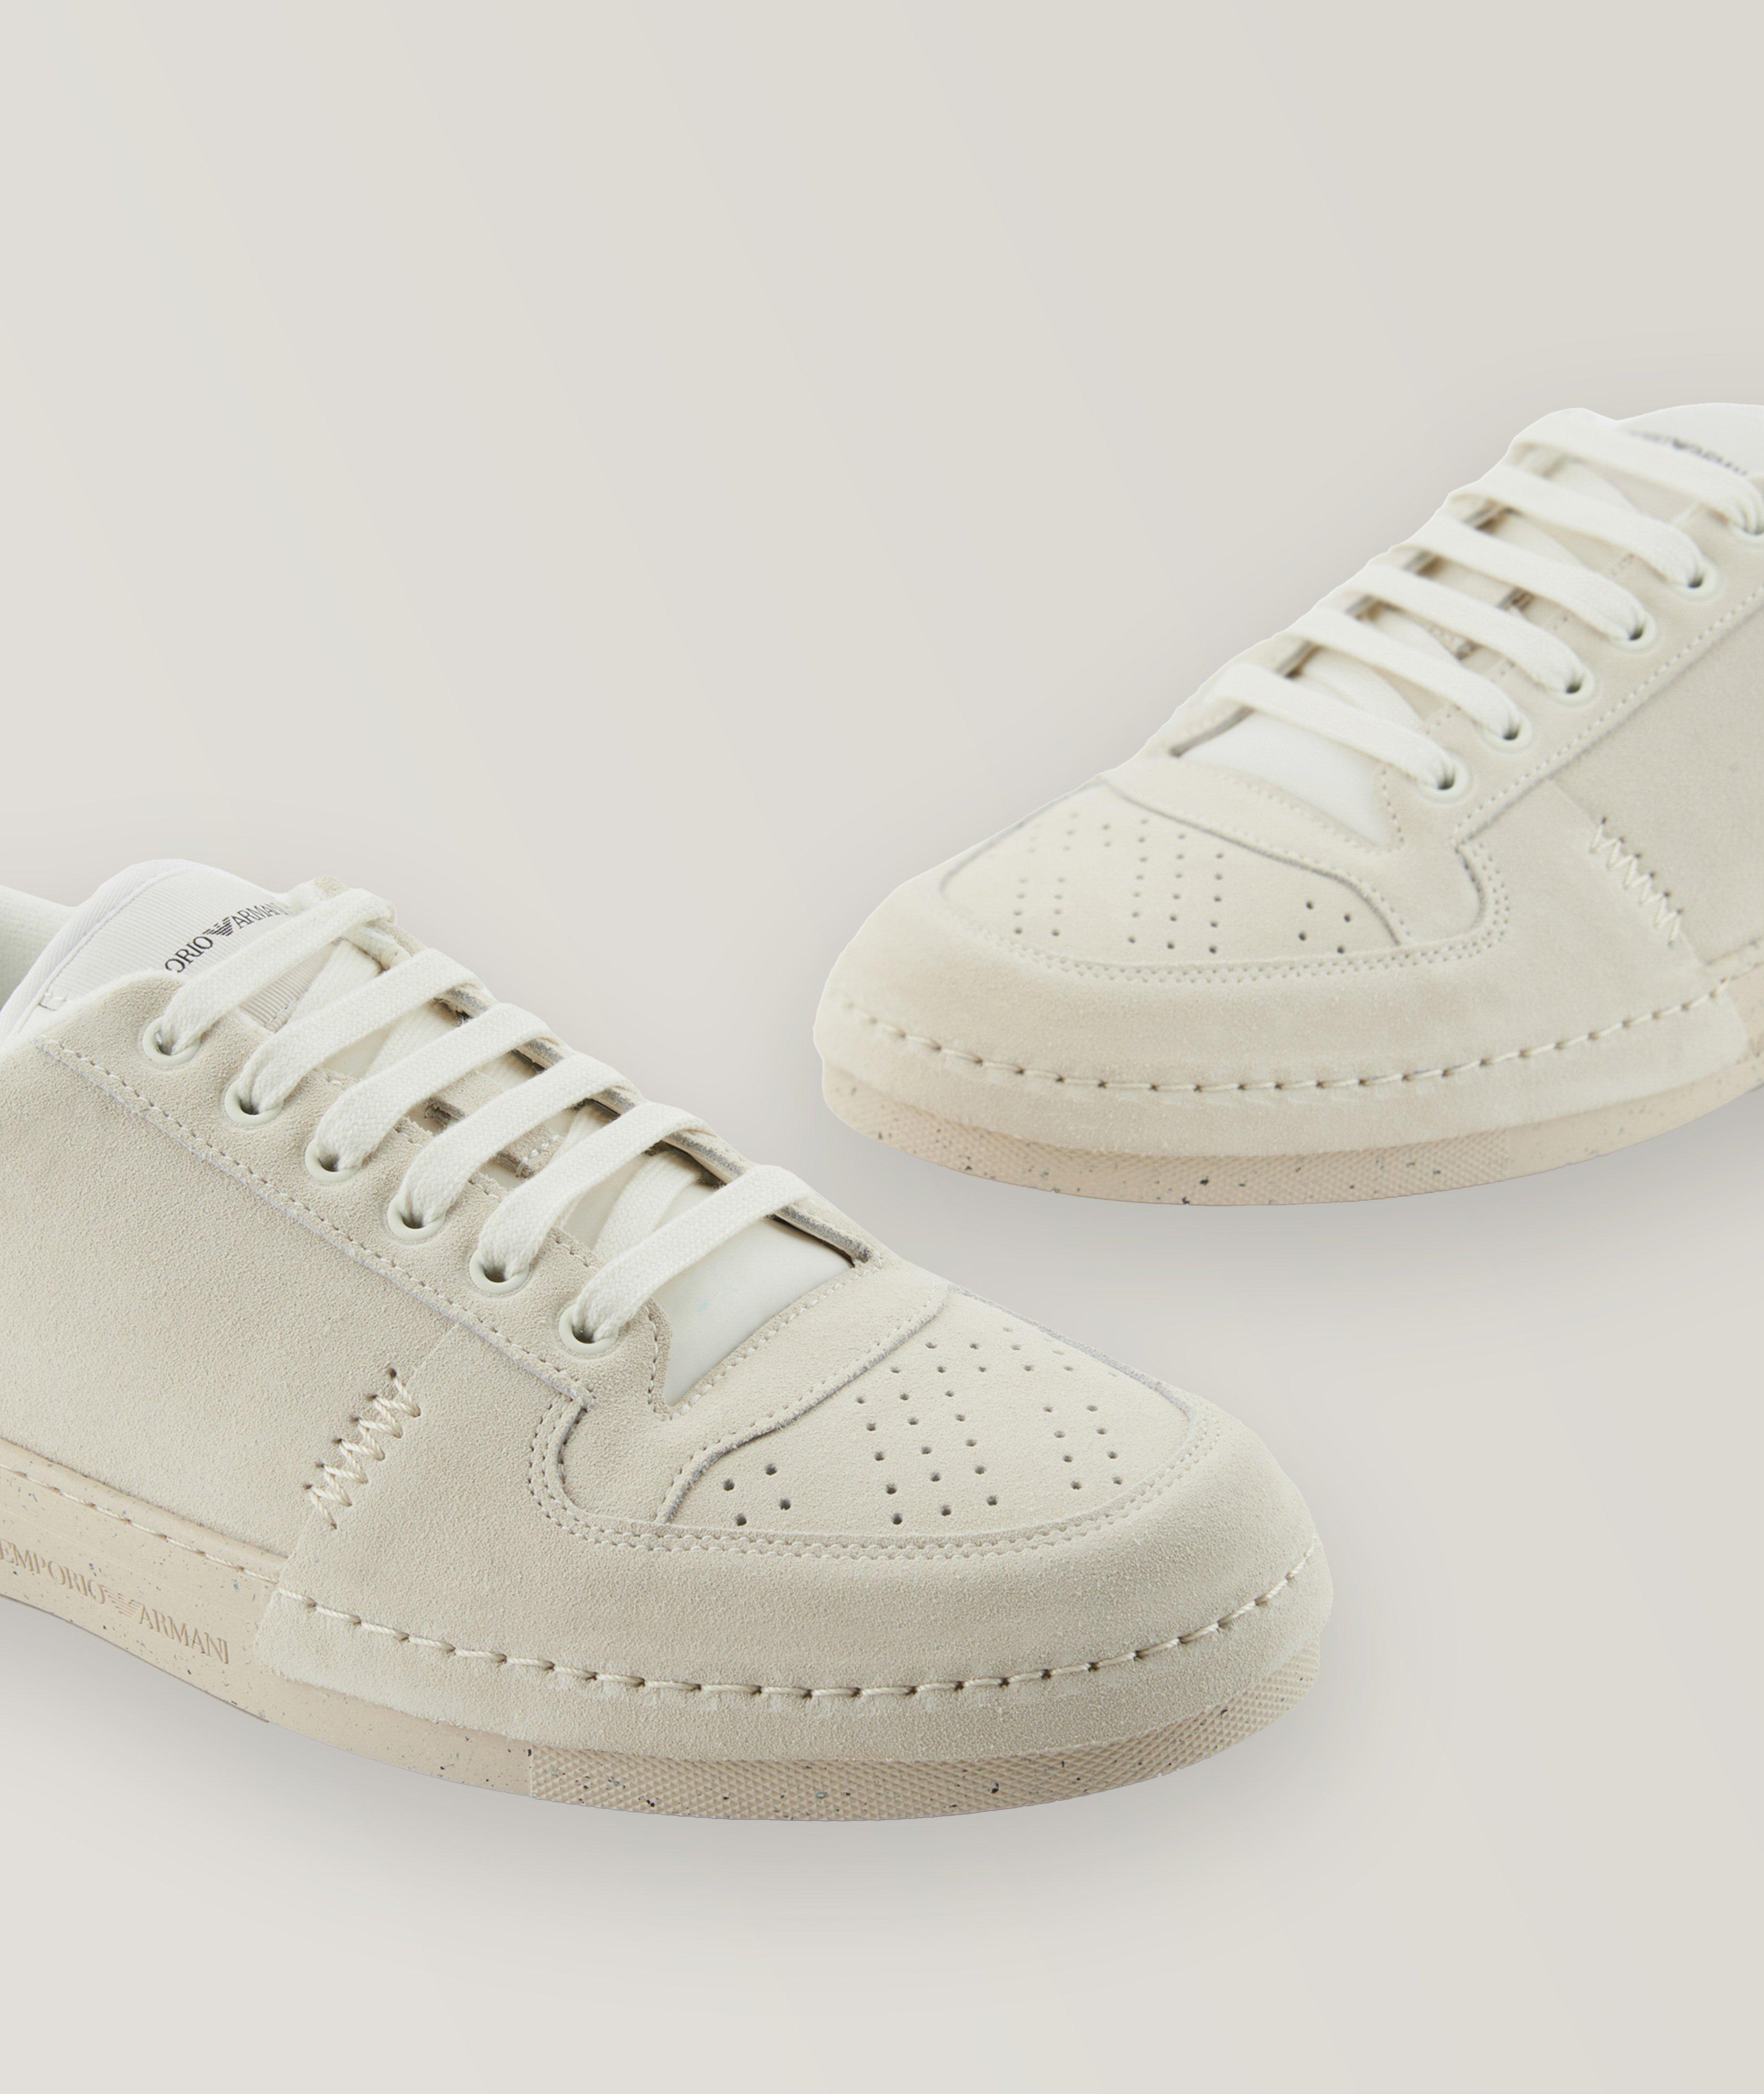 Suede Micro Perforated Sneakers image 5